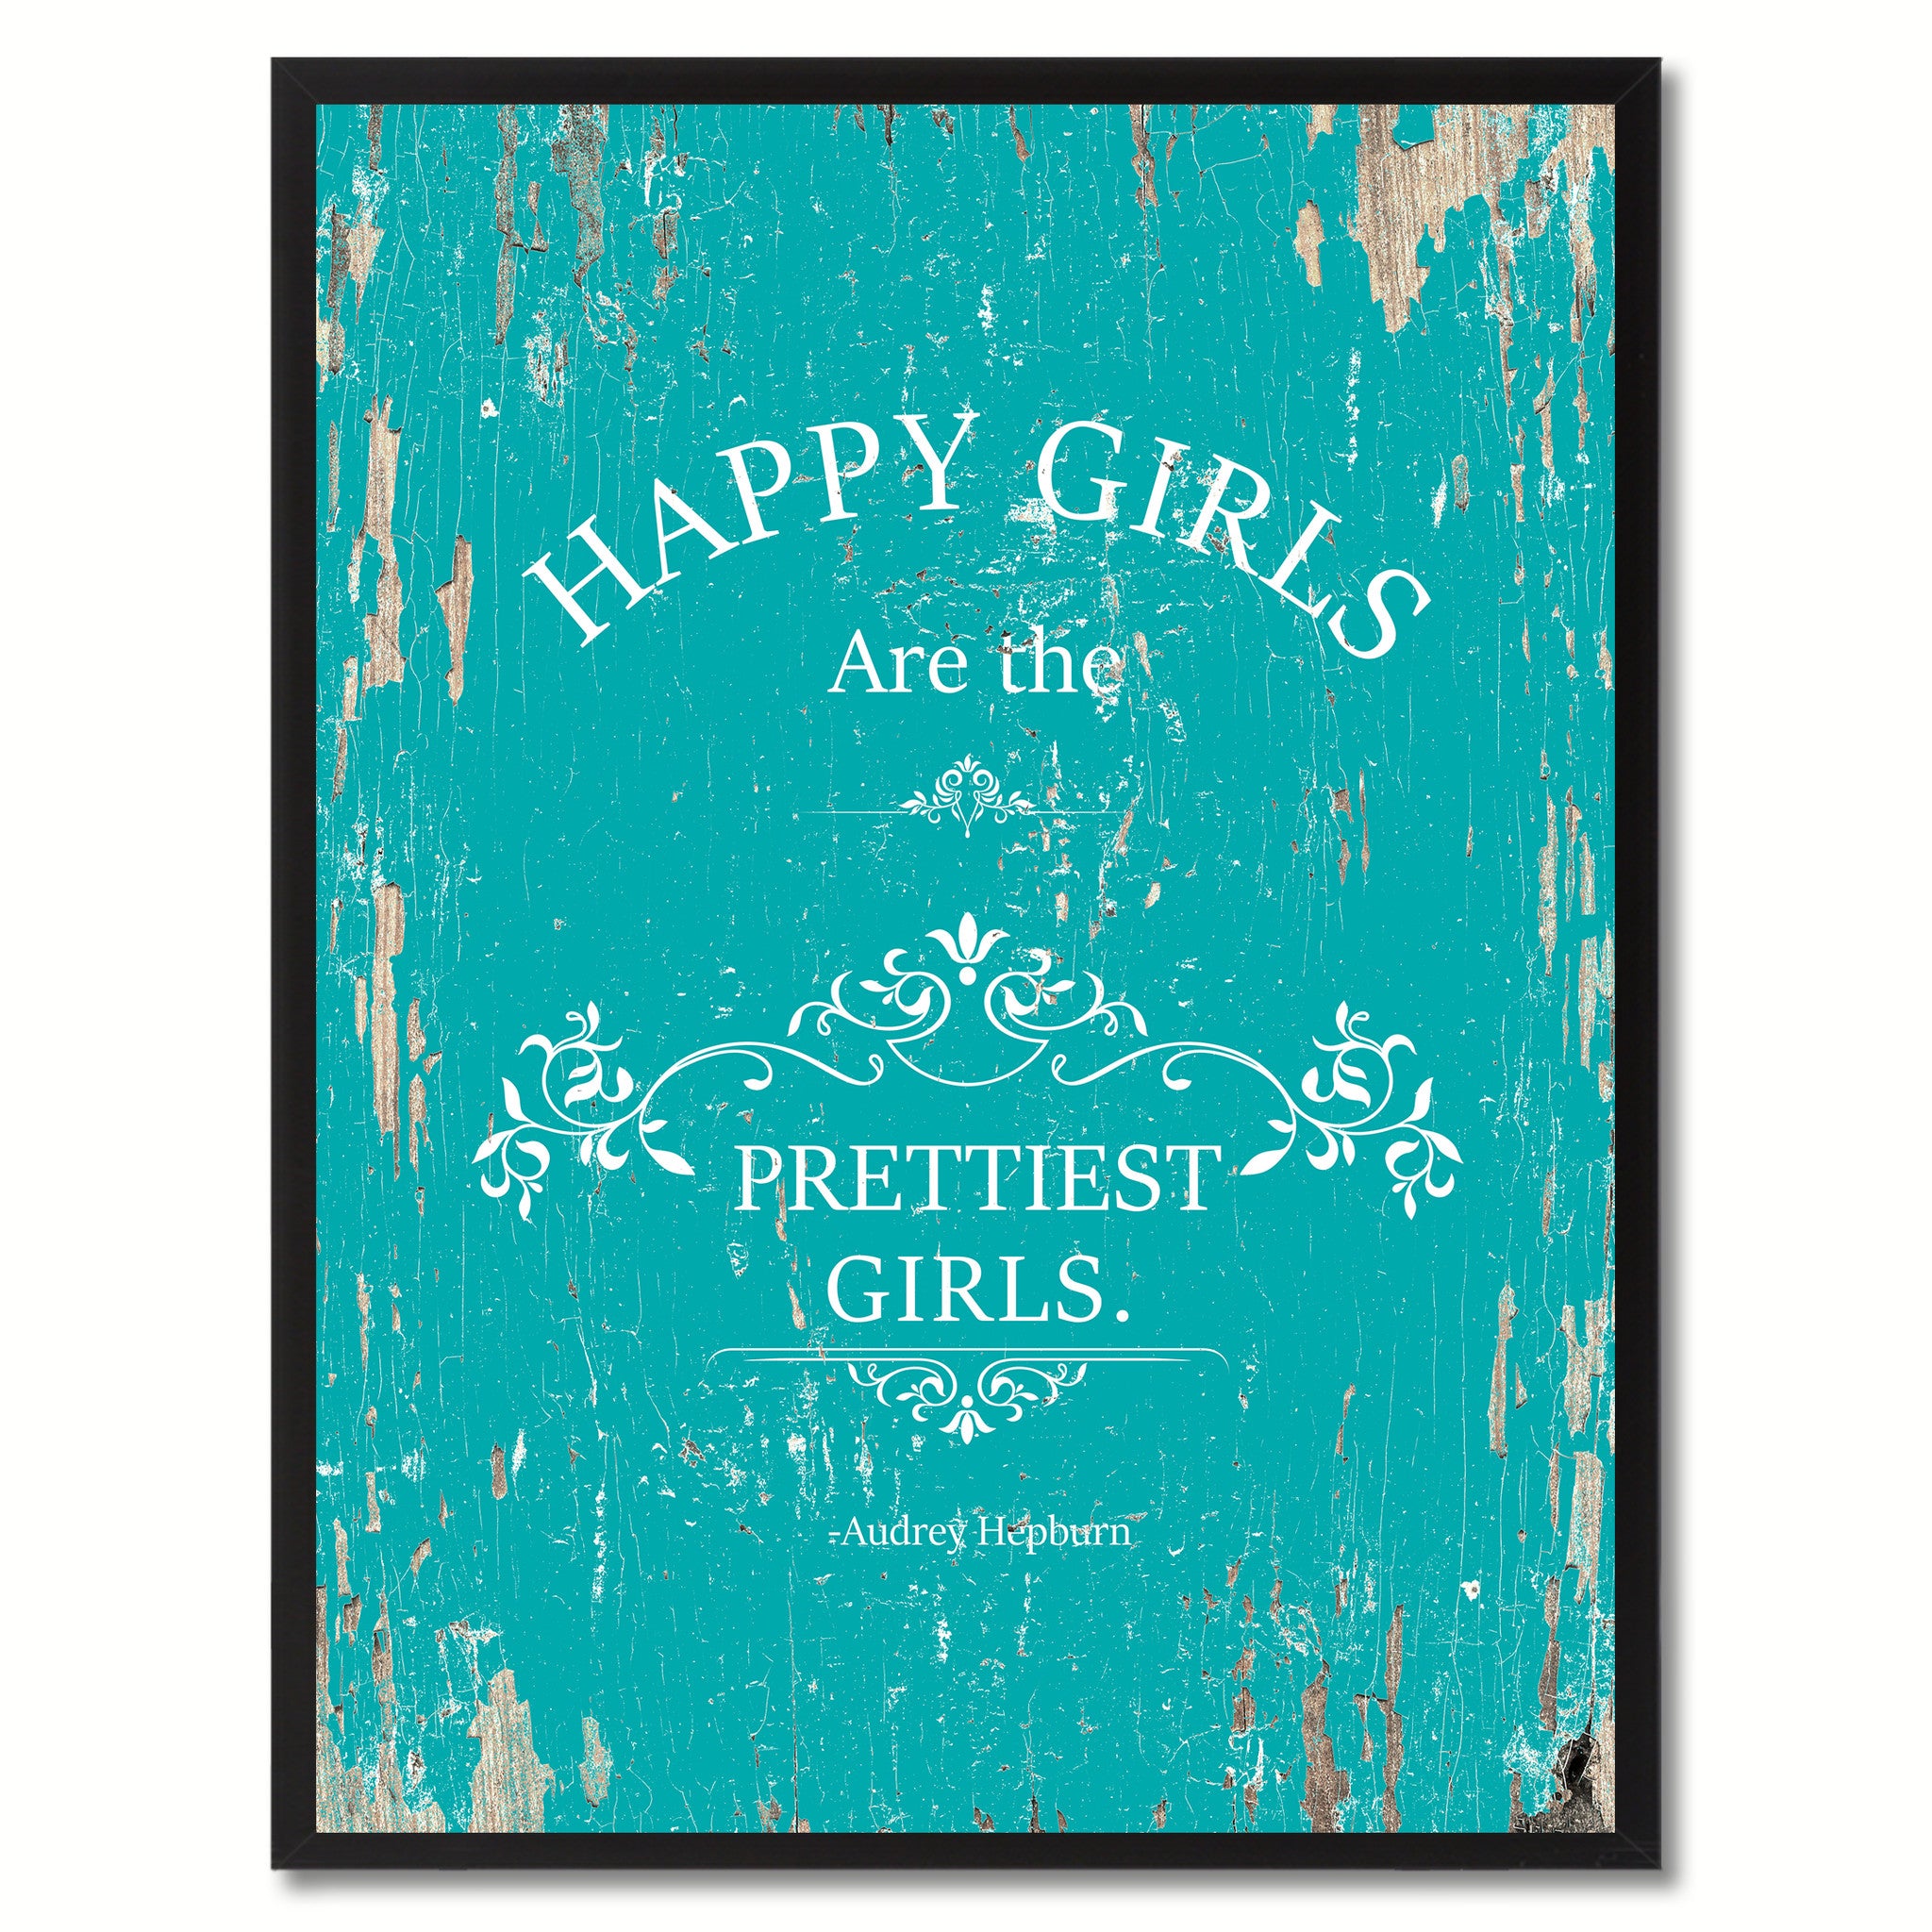 Happy girls are the prettiest girls - Audrey Hepburn Vintage Saying Gifts Home Decor Wall Art Canvas Print with Custom Picture Frame, Aqua